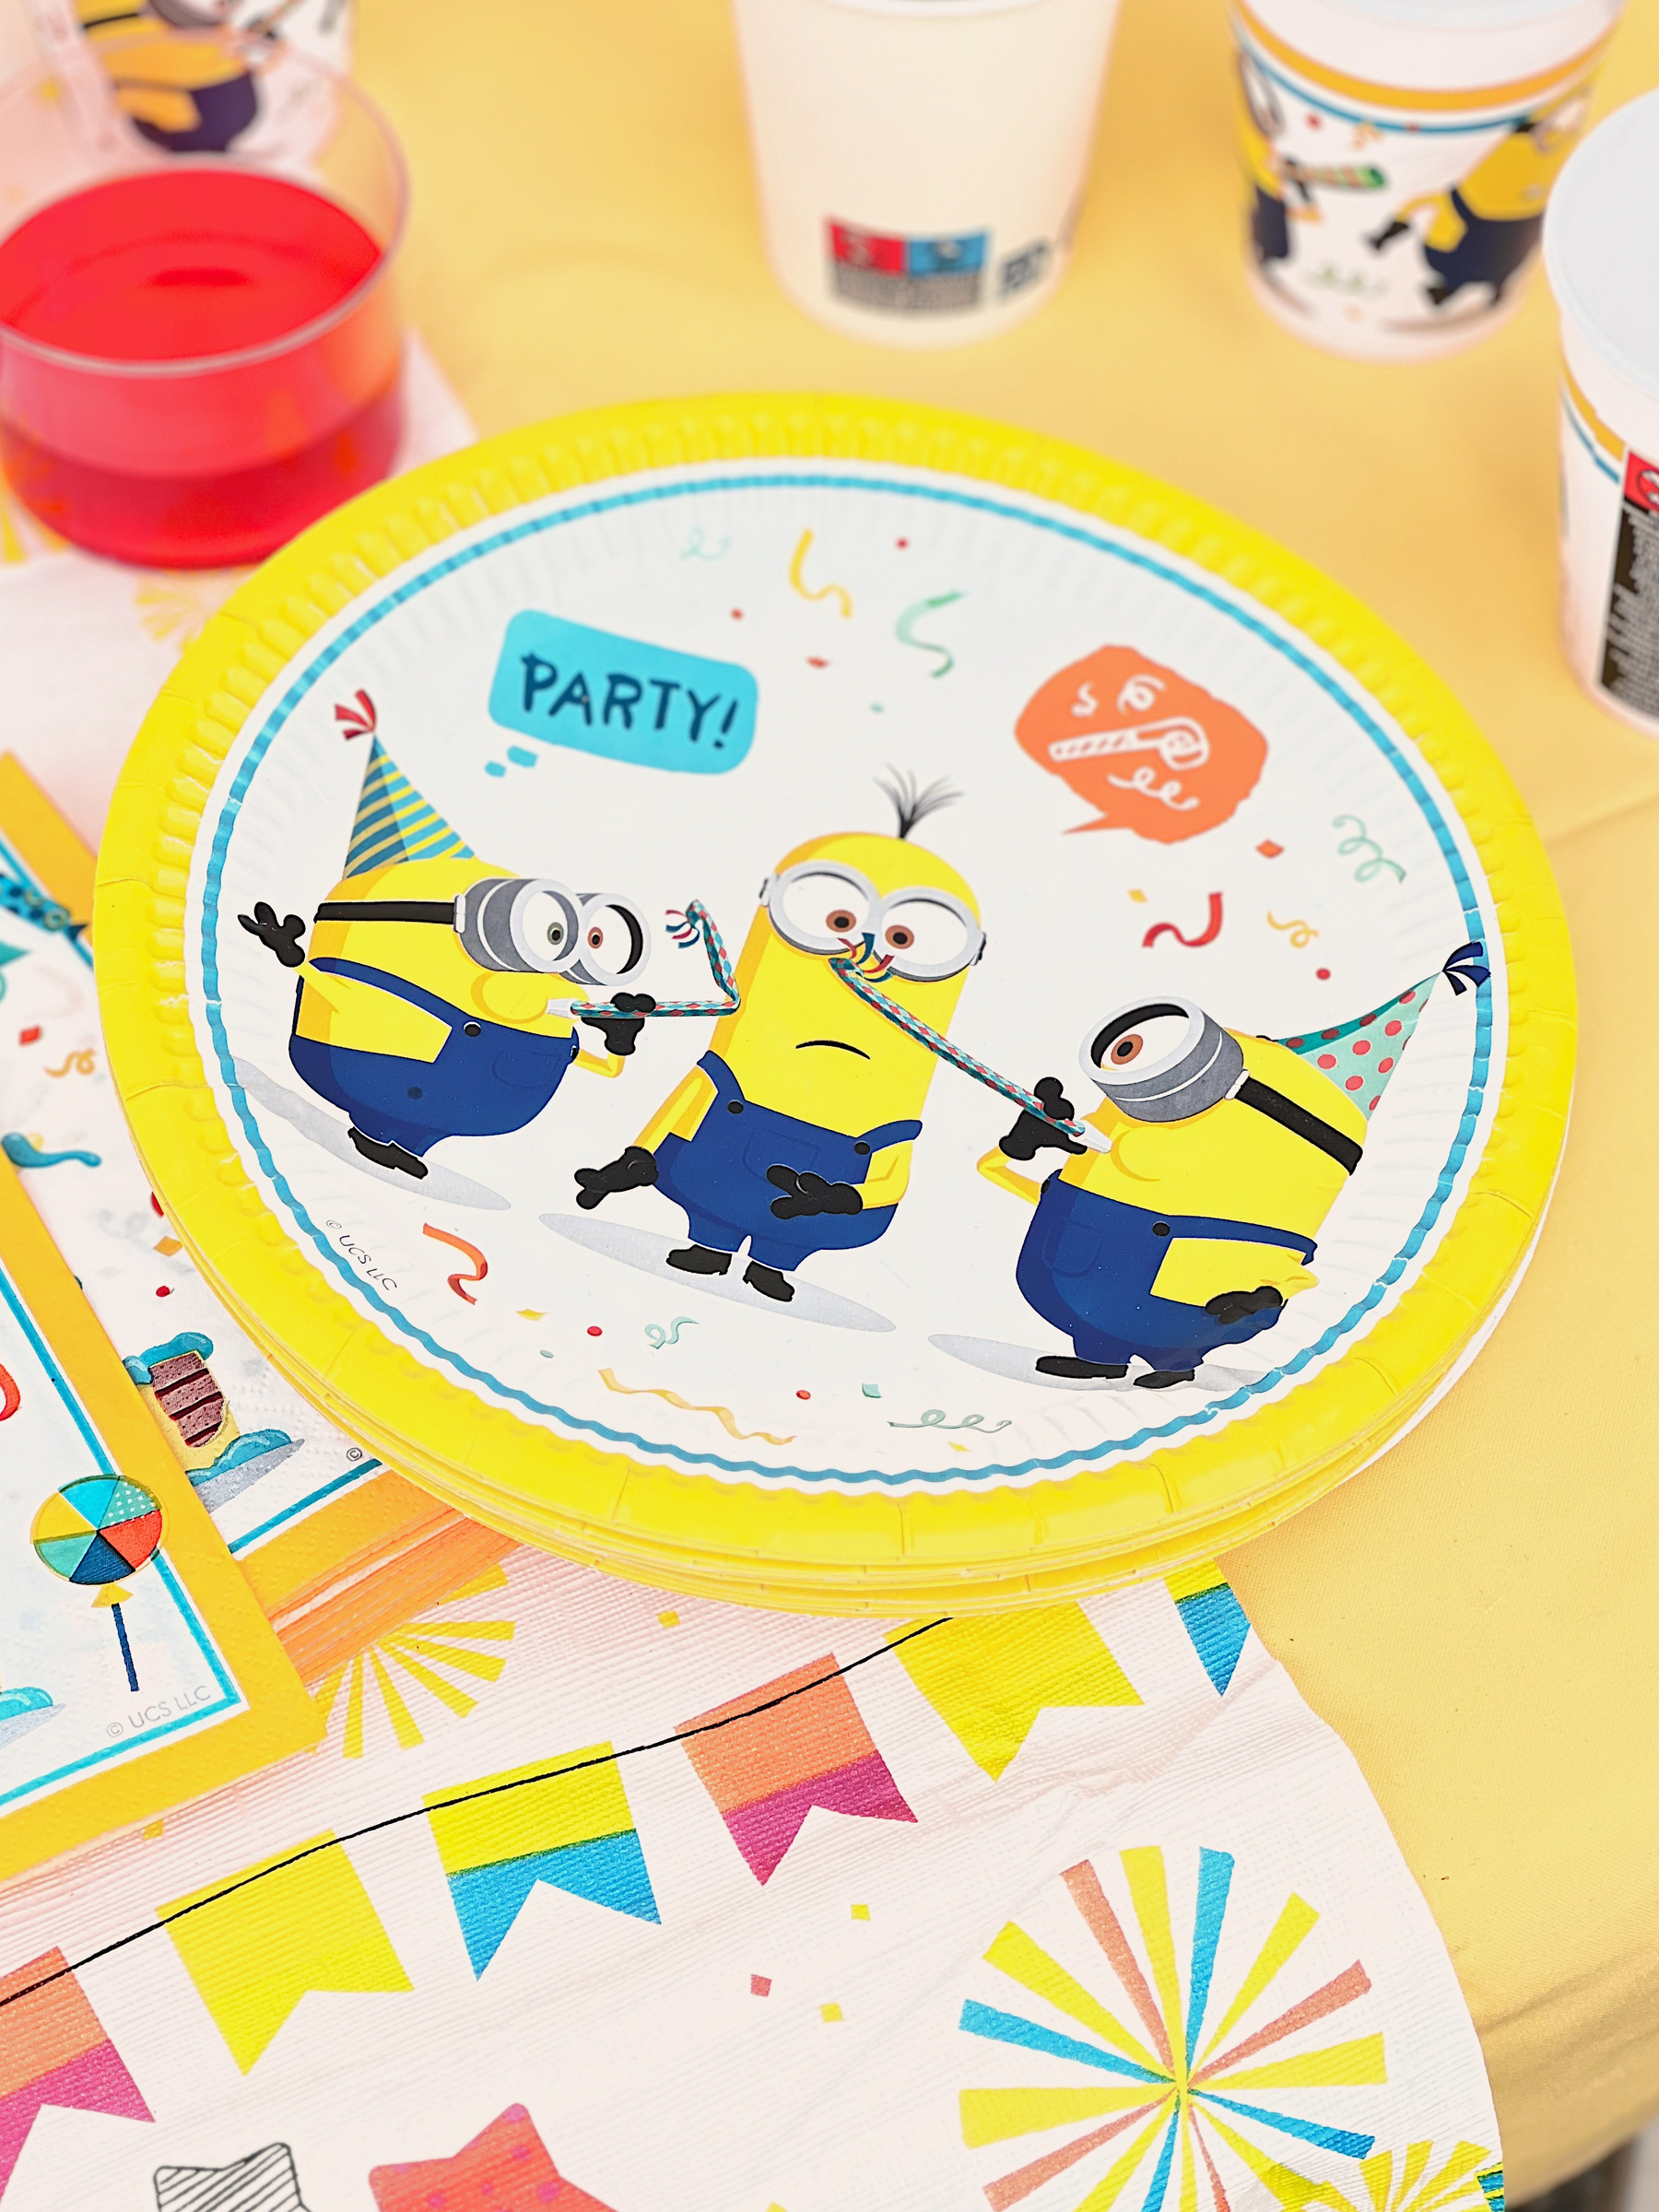 Minions on a birthday party plate. 